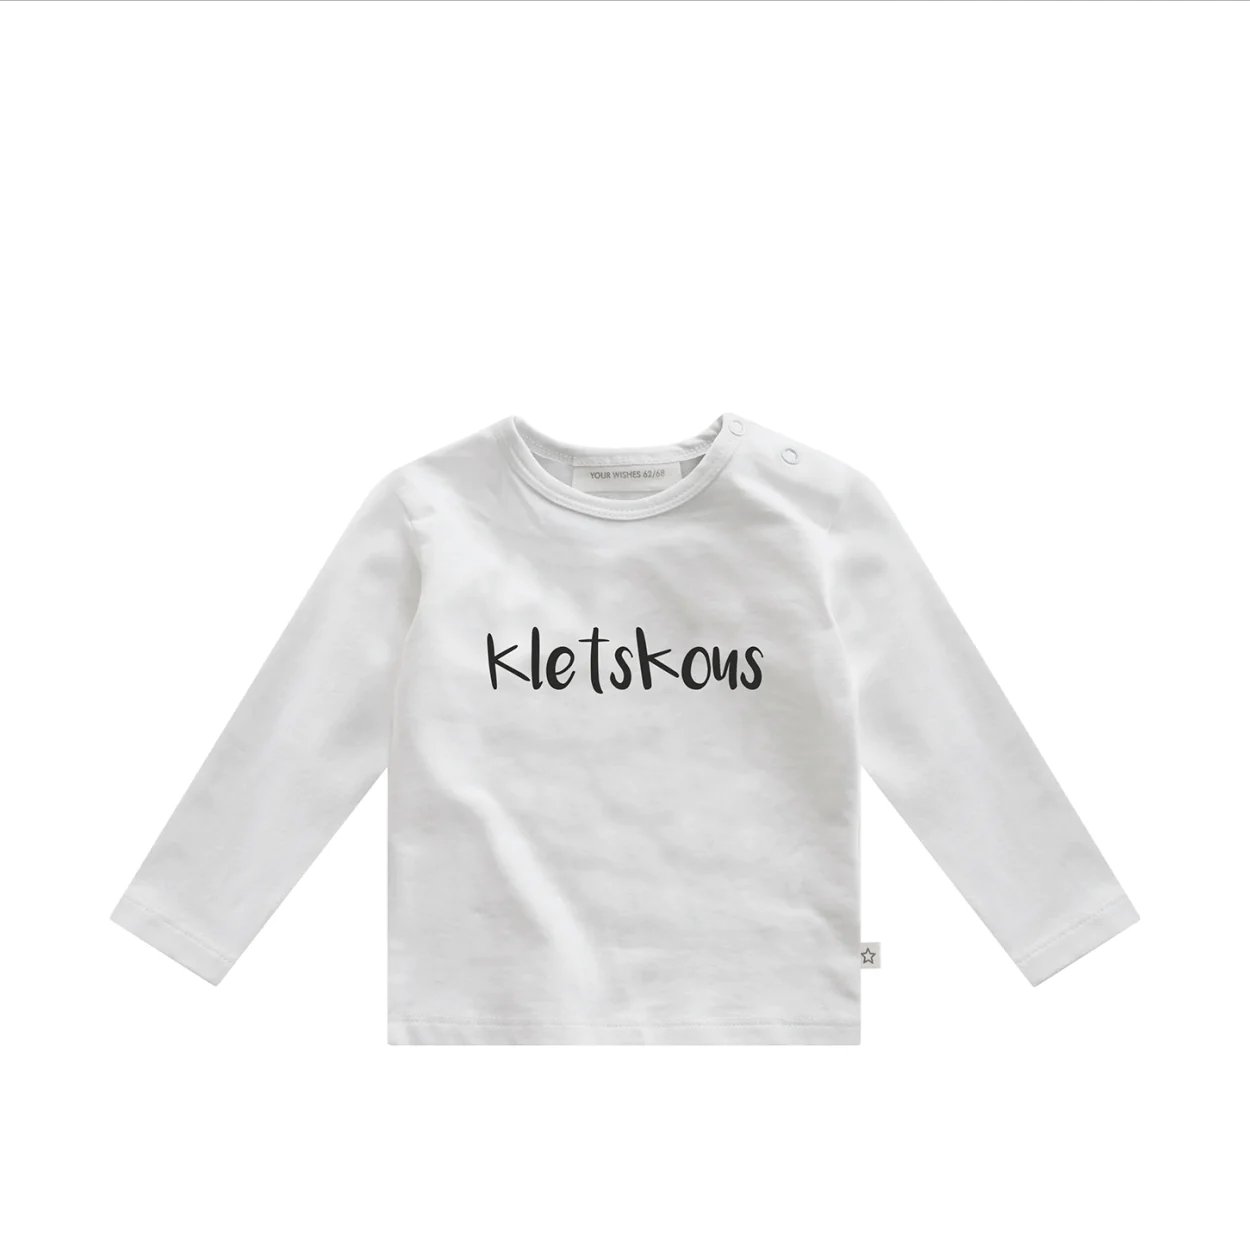 Your whishes shirt kletskous wit